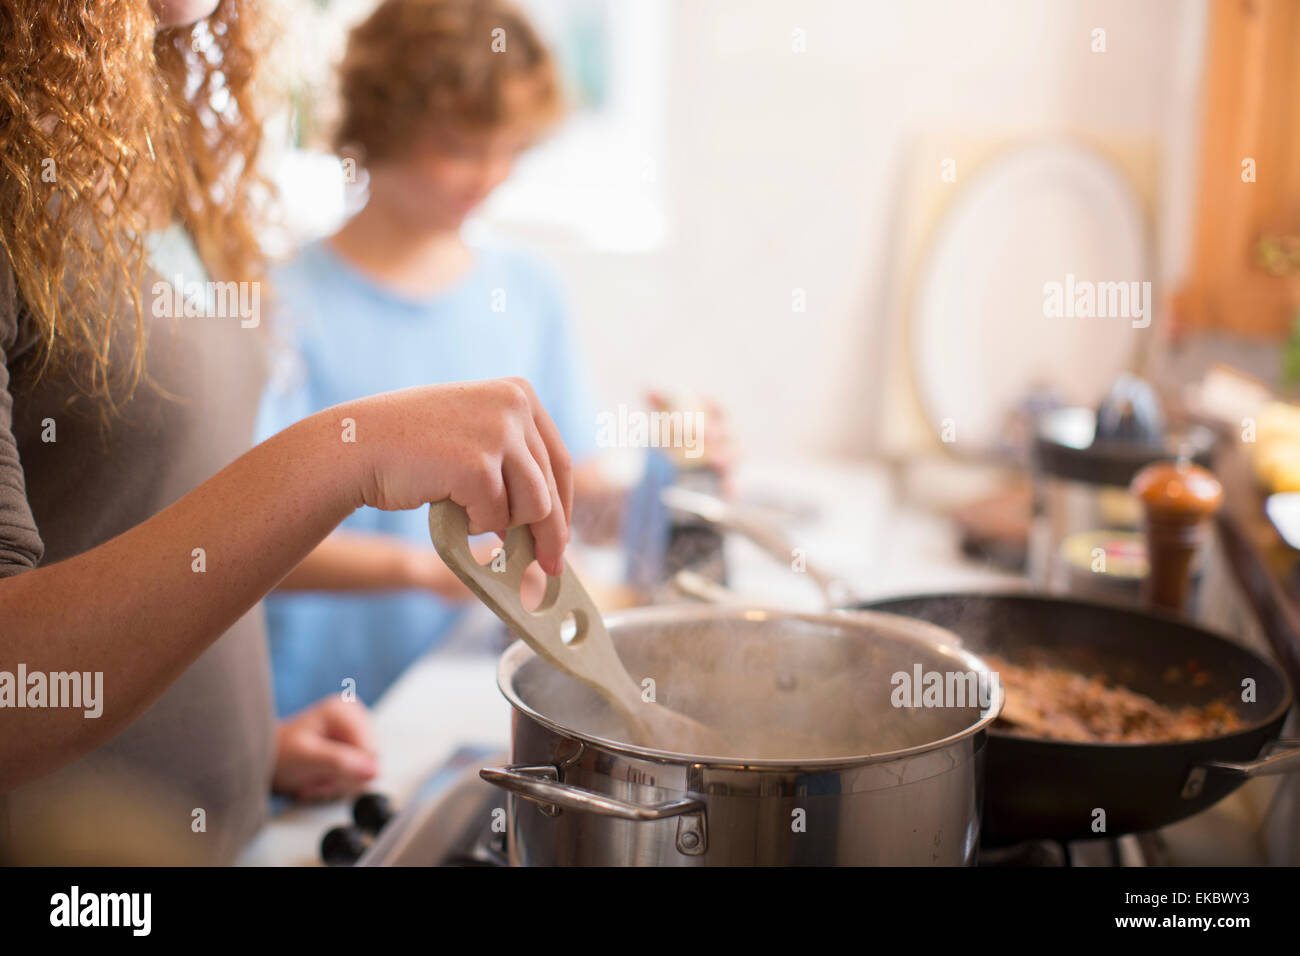 Siblings cooking in kitchen Stock Photo